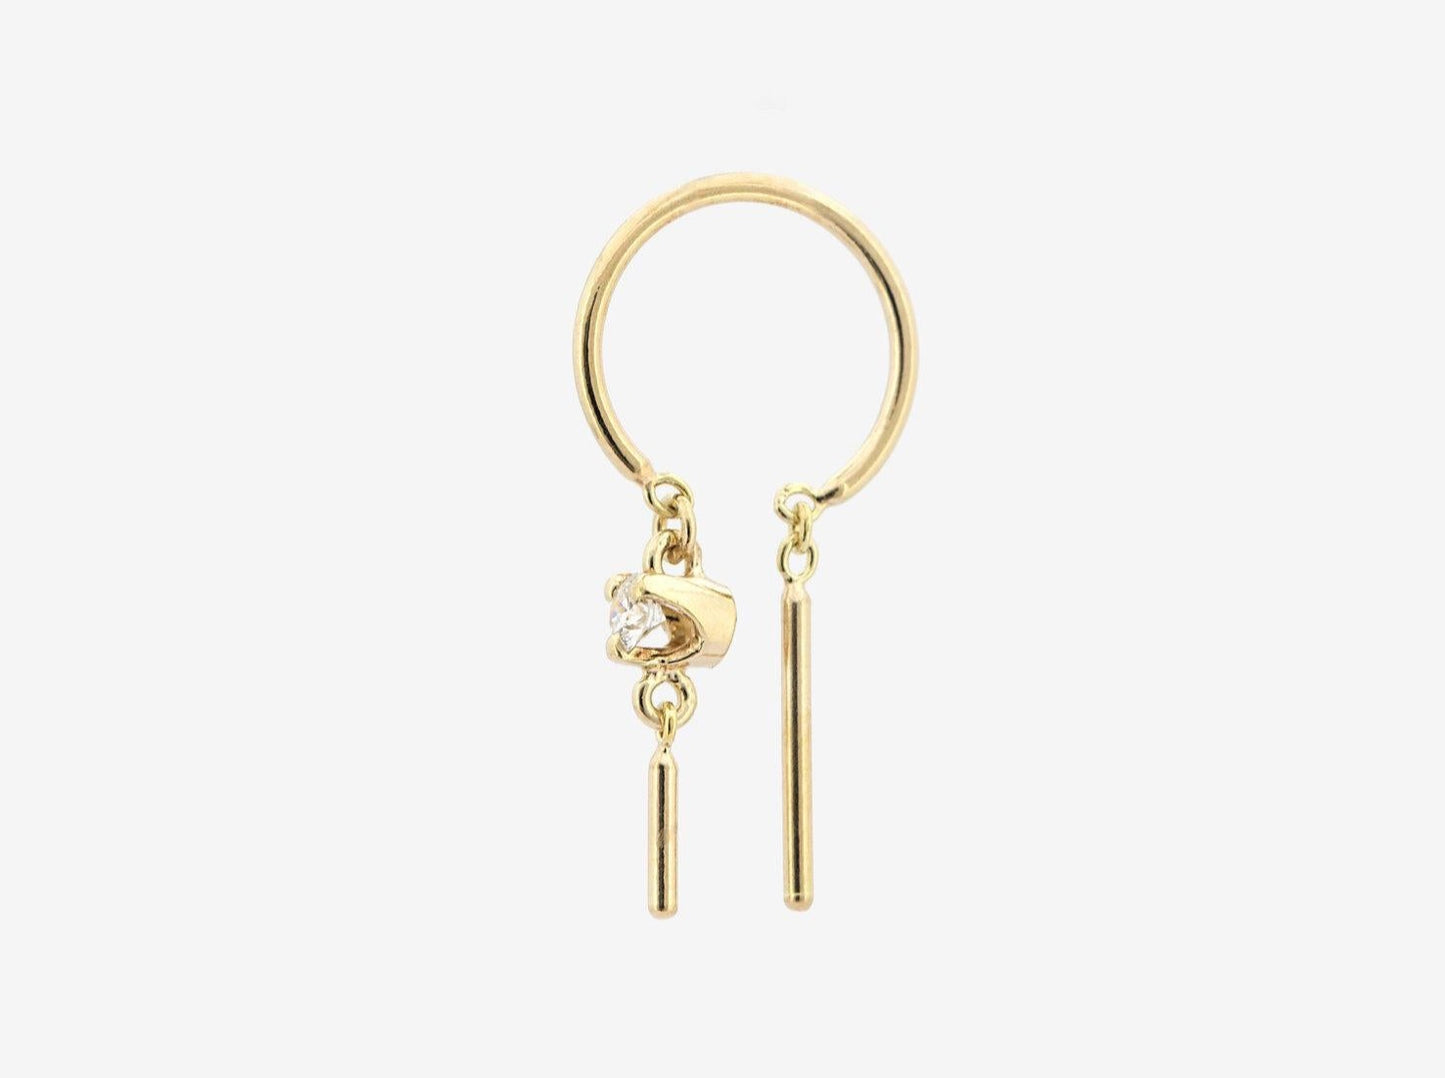 Diamond Baby Chime Earring in 14k Yellow Gold with Salt and Pepper Diamond by jack&g